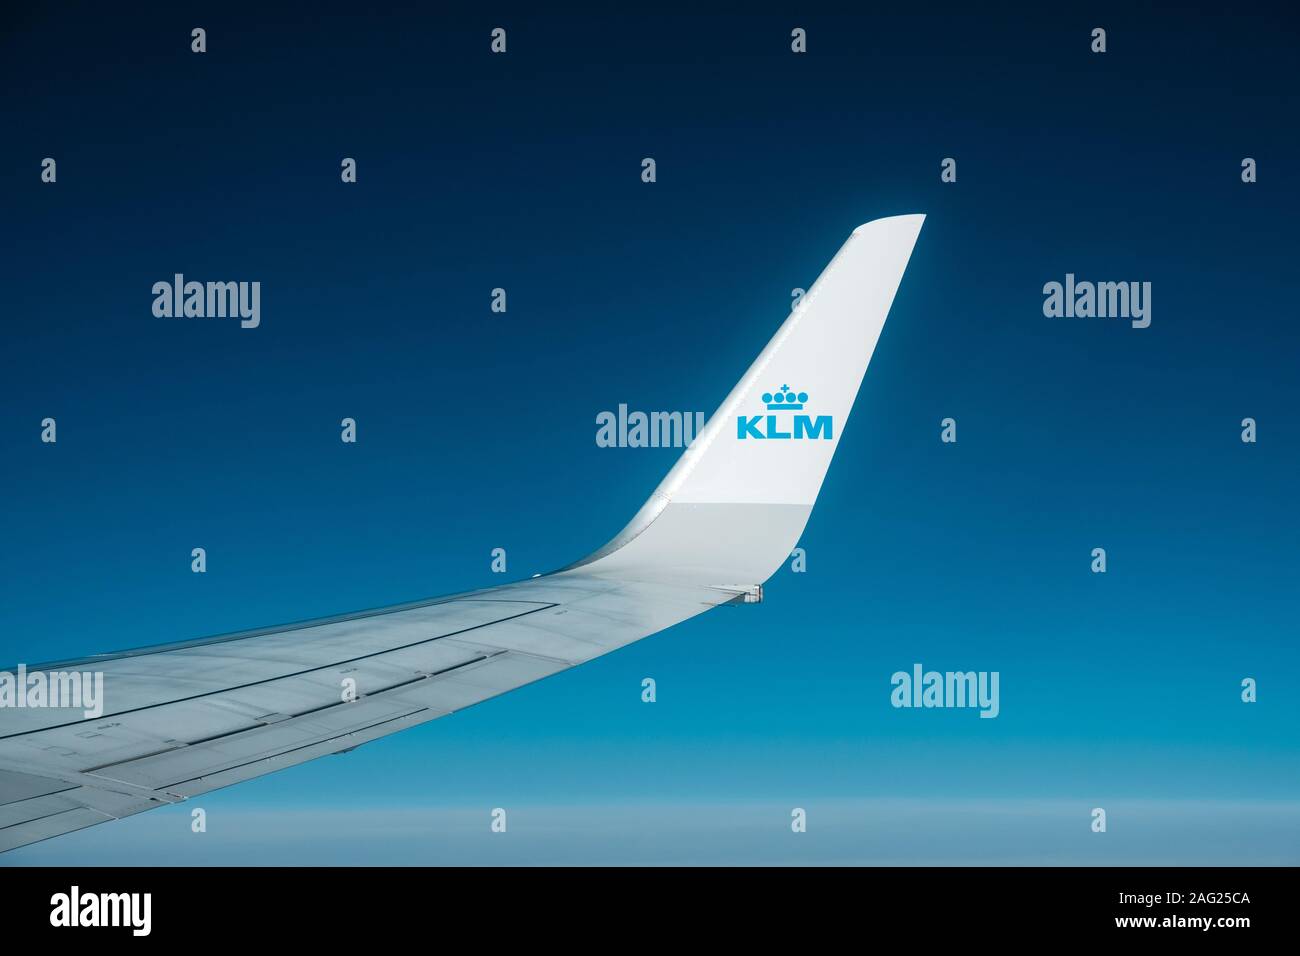 Amsterdam, Netherland - November, 2019: Airplane wing and company brand logo of KLM airlines isolated on blue sky Stock Photo